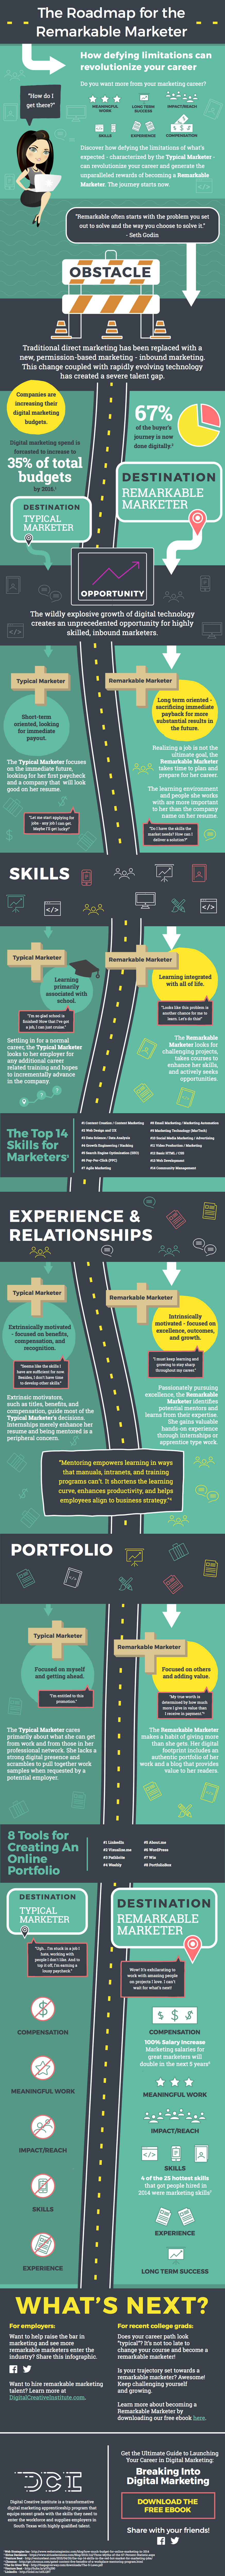 The Roadmap for the Remarkable Marketer